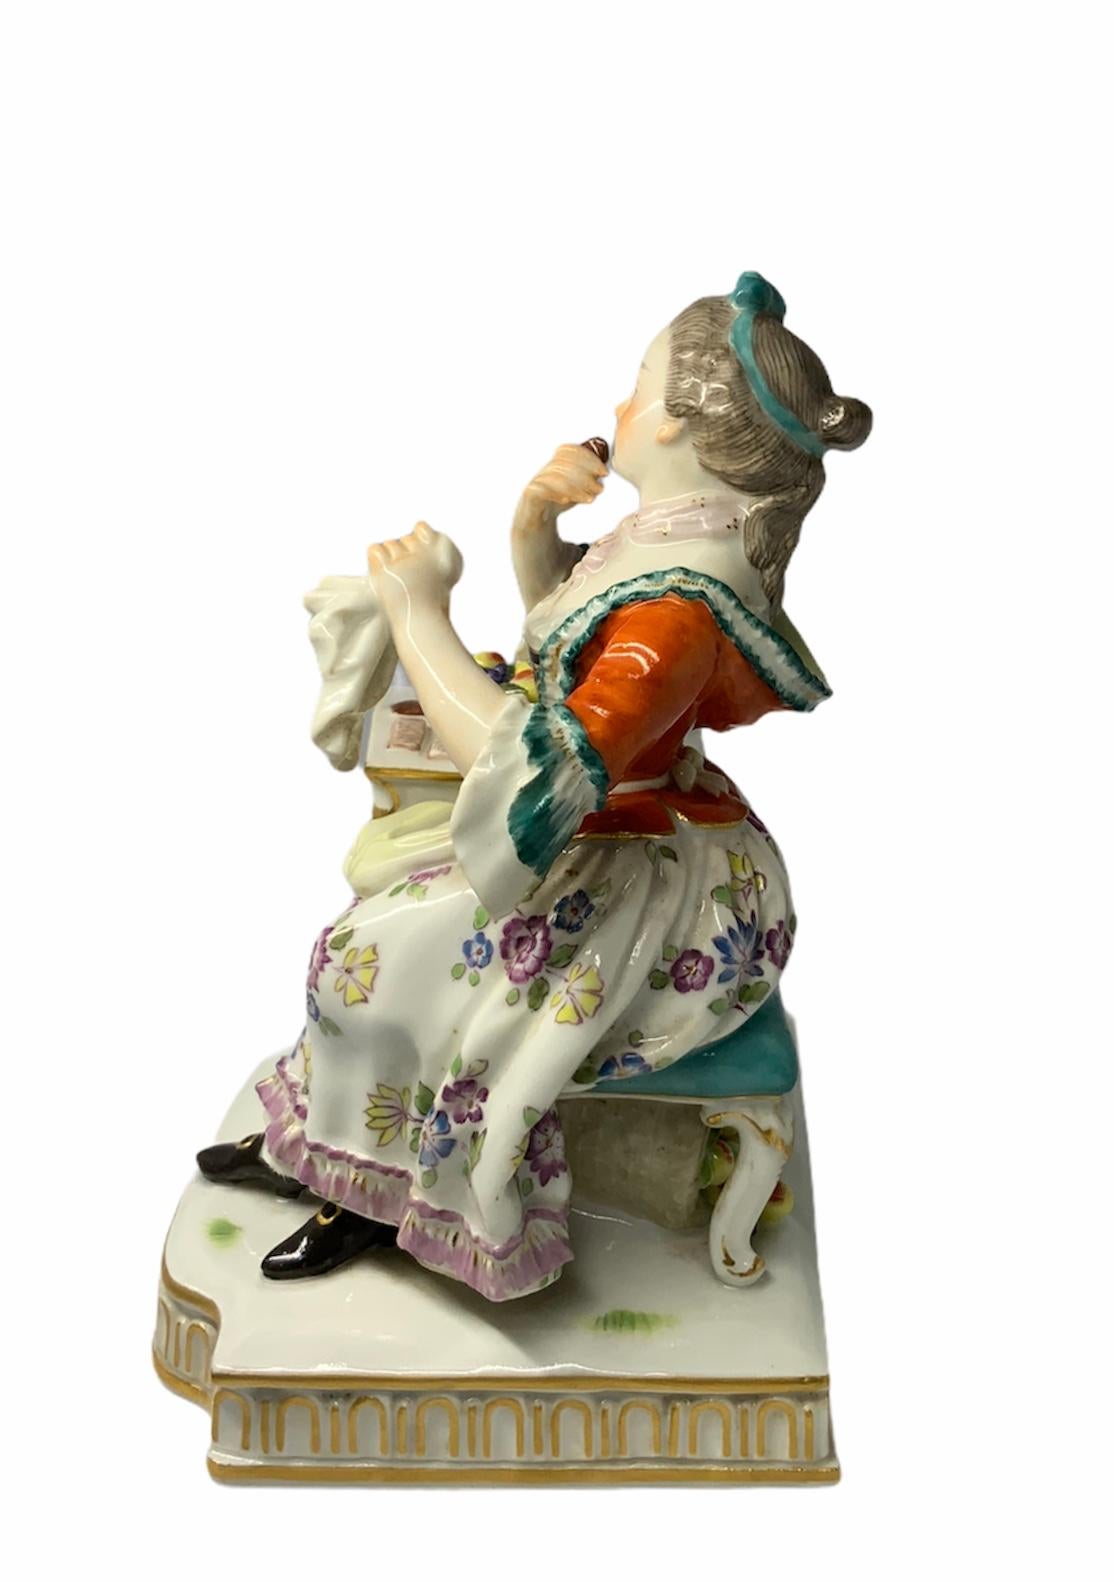 This a colorful and well made Meissen porcelain figurine that is part of group of five that represents the five senses. She represents the sense of taste. The porcelain figurine depicts a young lady sitting in front of a table with a plate of